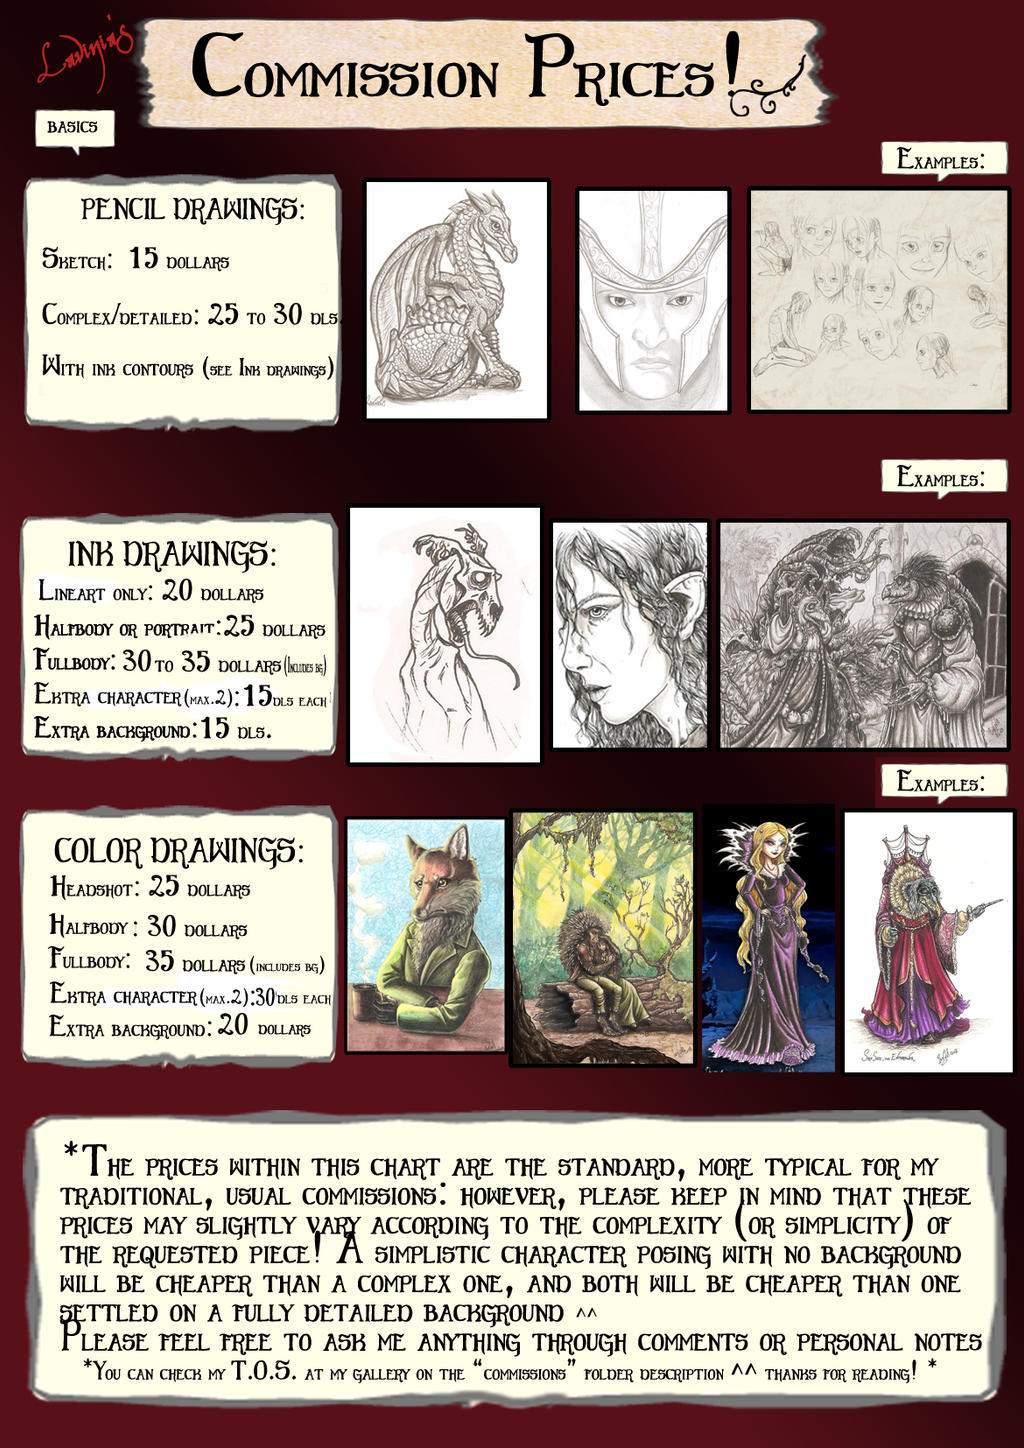 Commission Prices-chart!